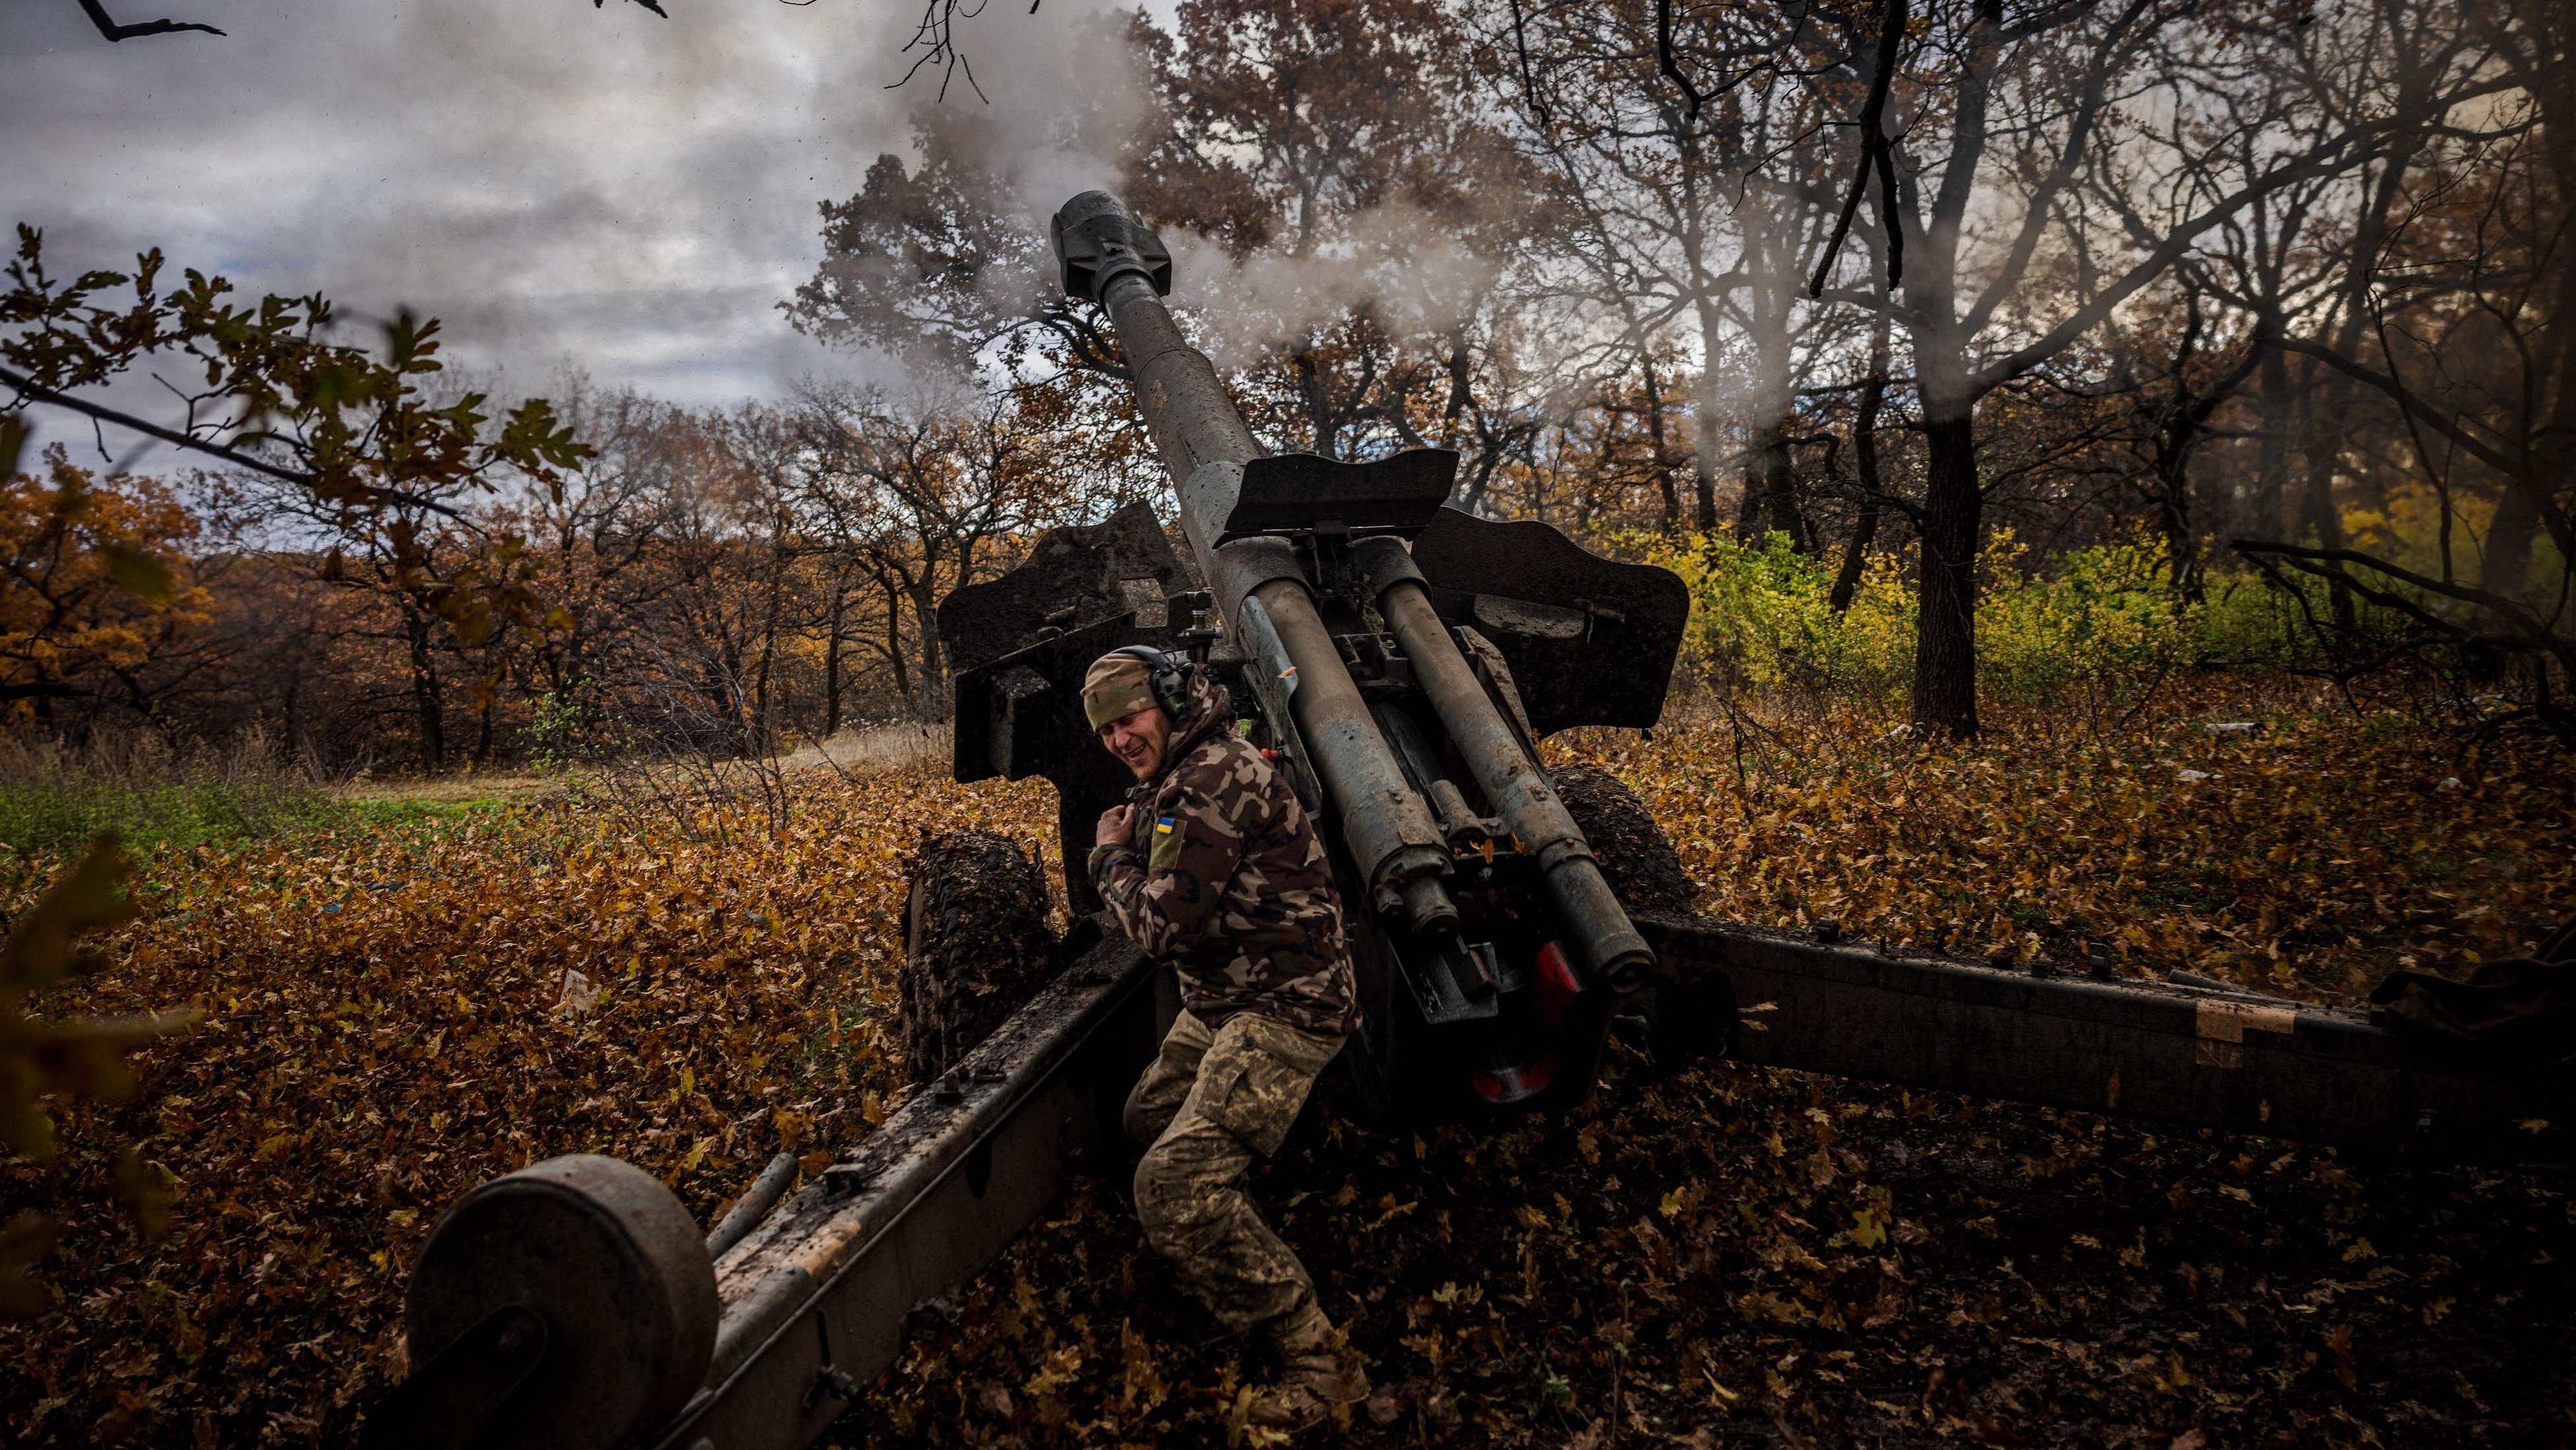 A Ukrainian artilleryman fires a 152 mm towed gun-howitzer (D-20) at a position on the front line near the town of Bakhmut, in eastern Ukraine's Donetsk region, on October 31, 2022, amid Russian invasion of Ukraine. Credit: AFP Photo